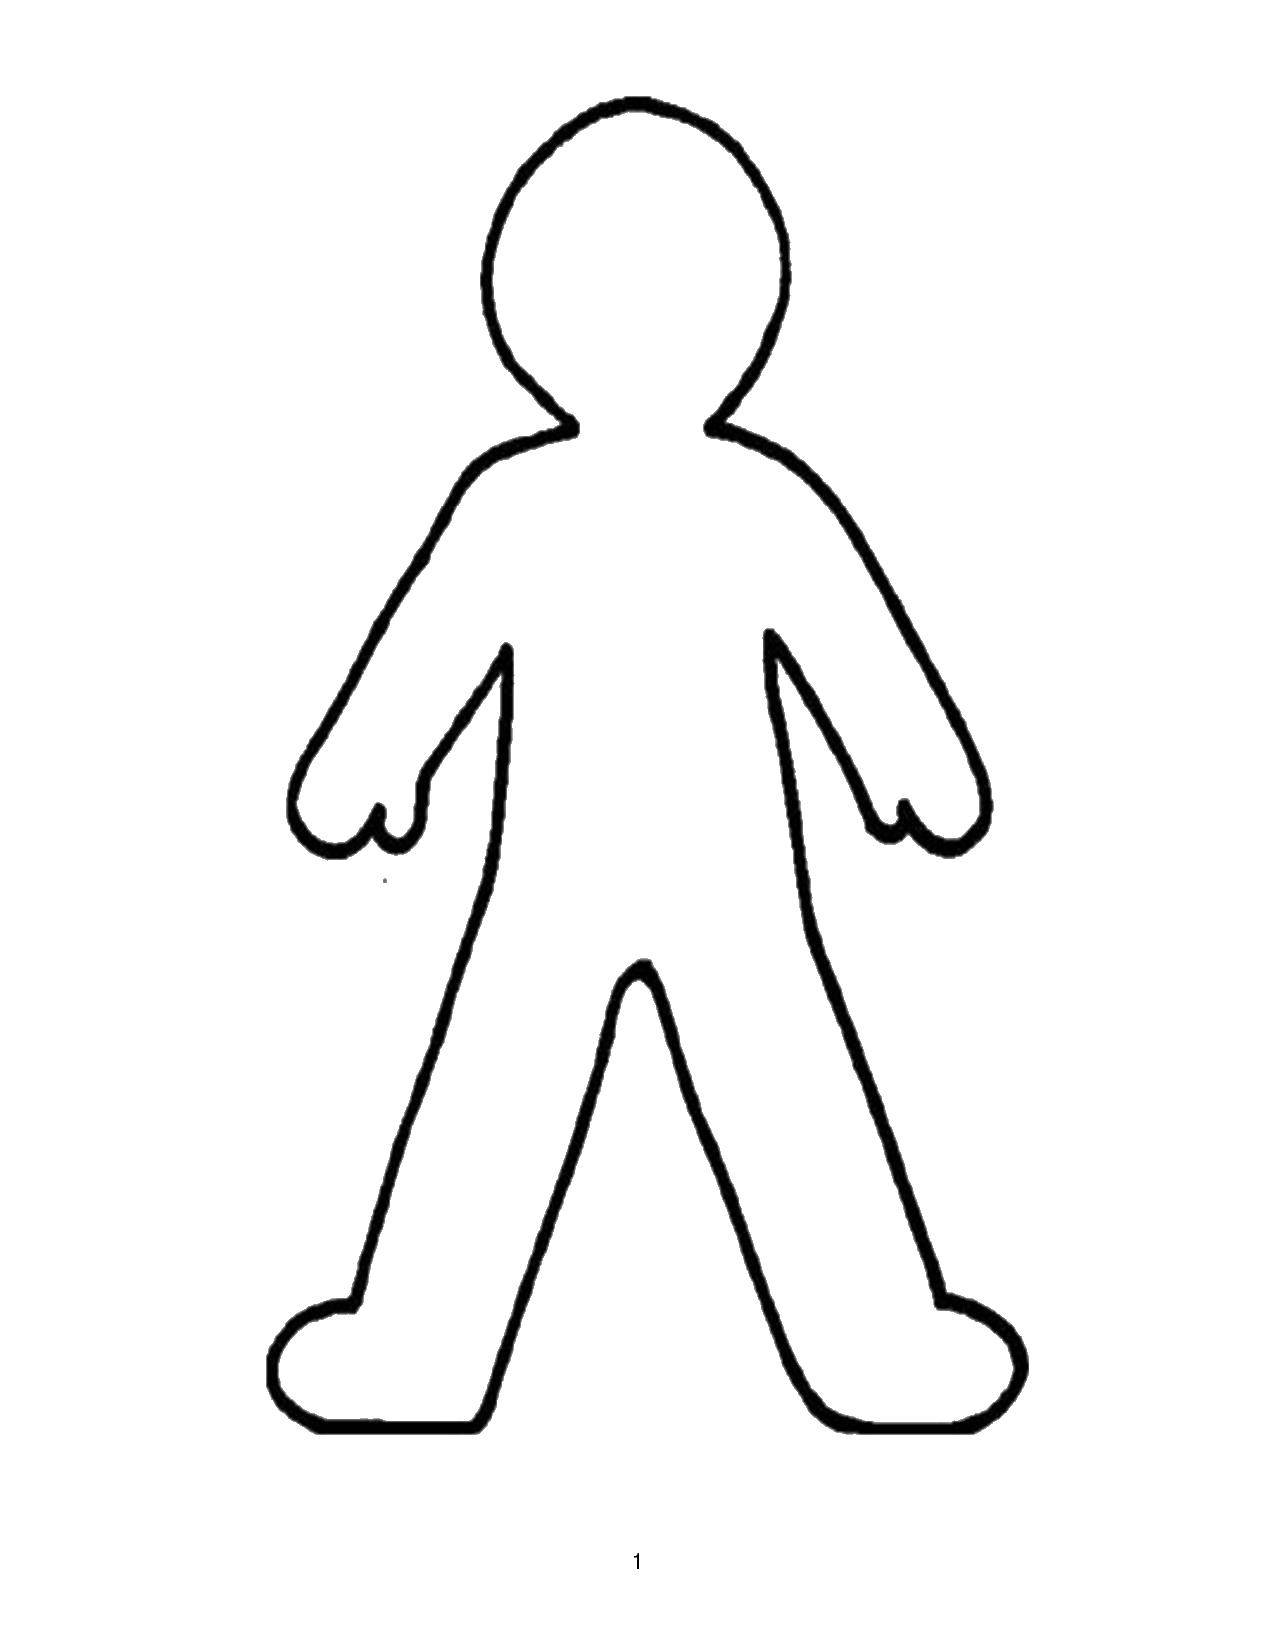 Coloring Outline of paper man. Category The contour of girls. Tags:  outline , man, hands, feet.